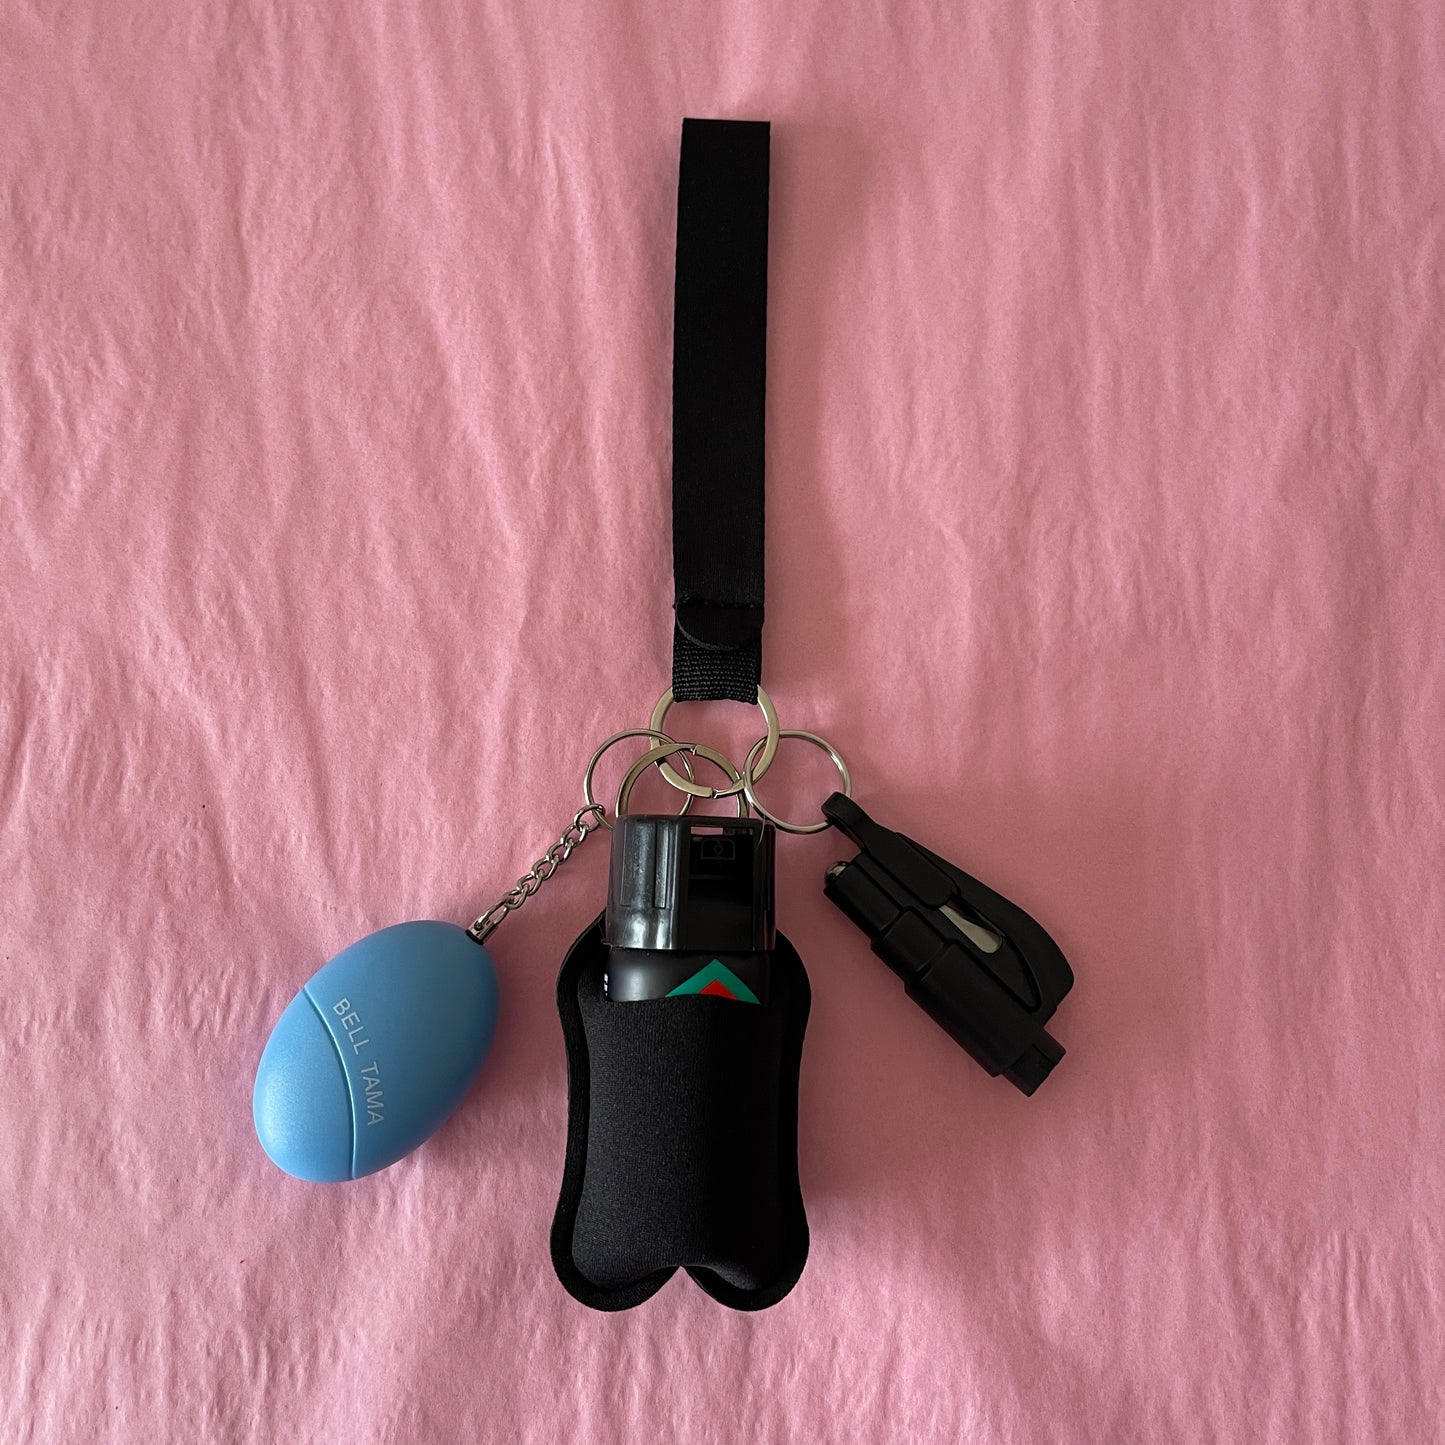 PERSONAL SAFETY KEYCHAIN